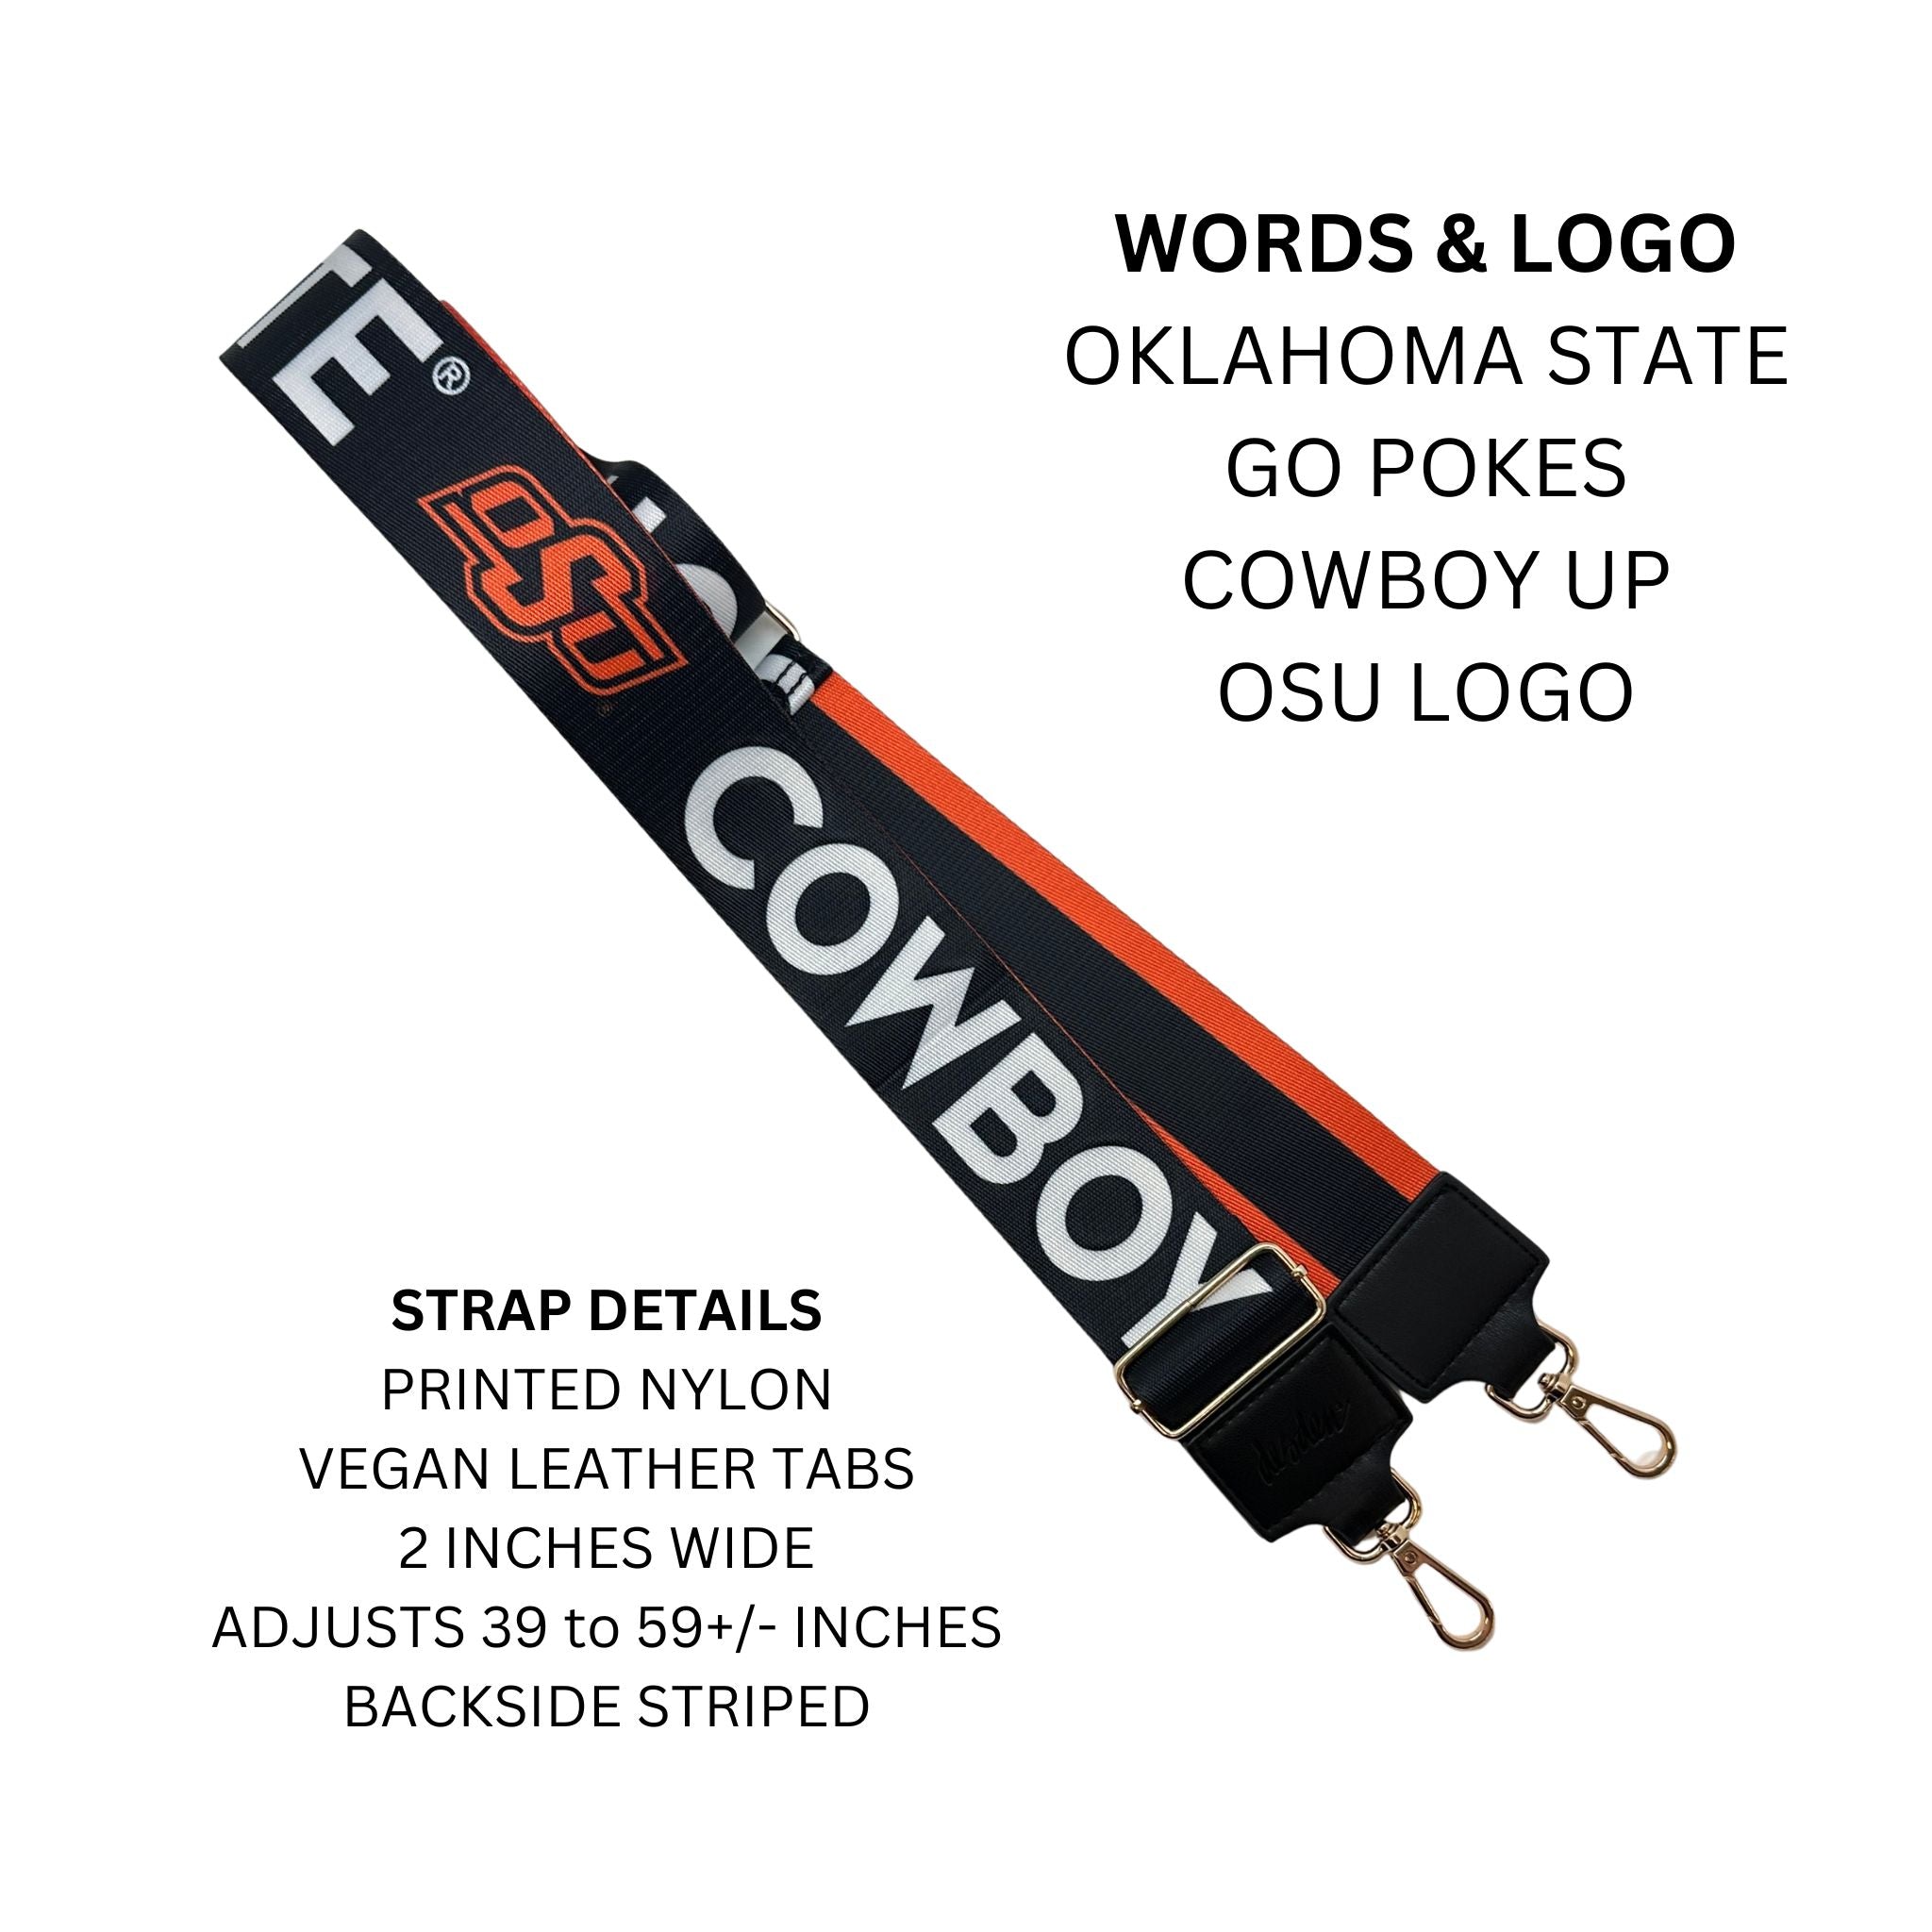 OKLAHOMA STATE 2" - Officially Licensed - Stripe